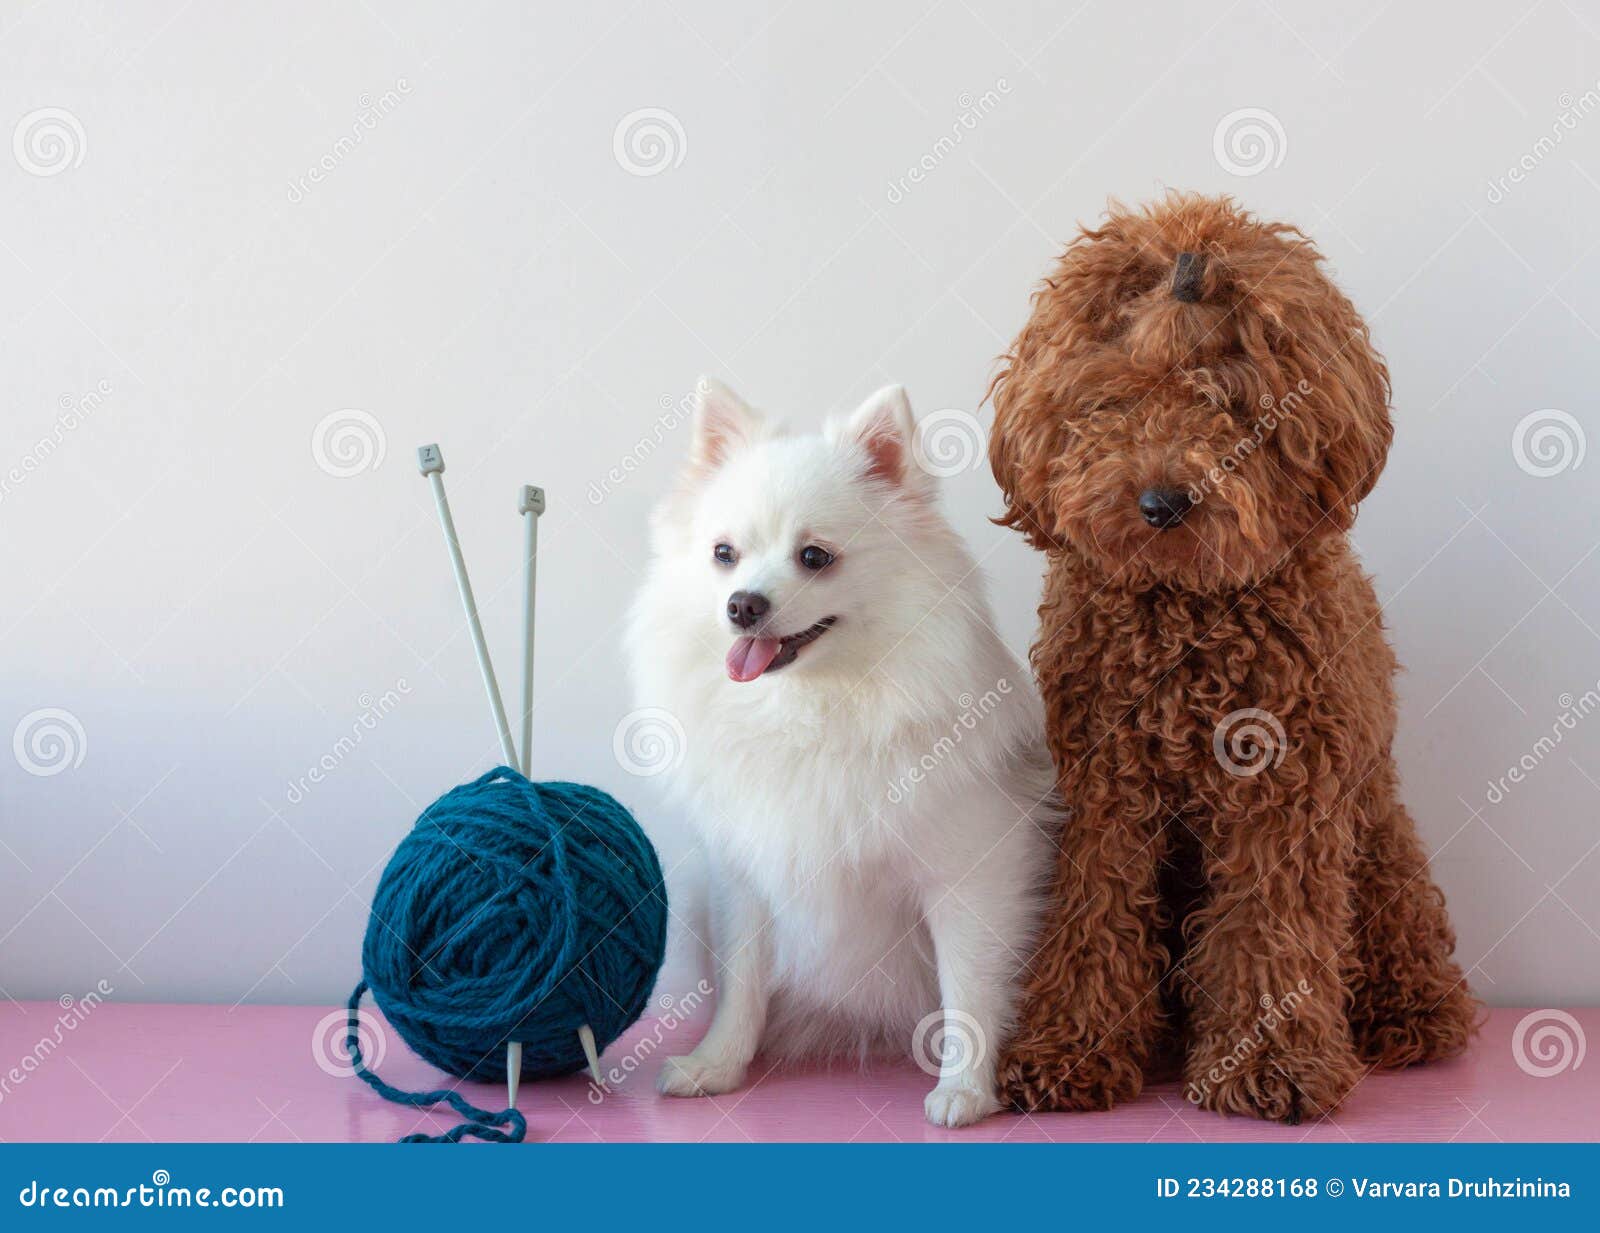 Two Small Dogs a Miniature Poodle and a White Pomeranian are Sitting Next  To a Large Ball of Knitting Yarn Stock Photo - Image of curly, together:  234288168